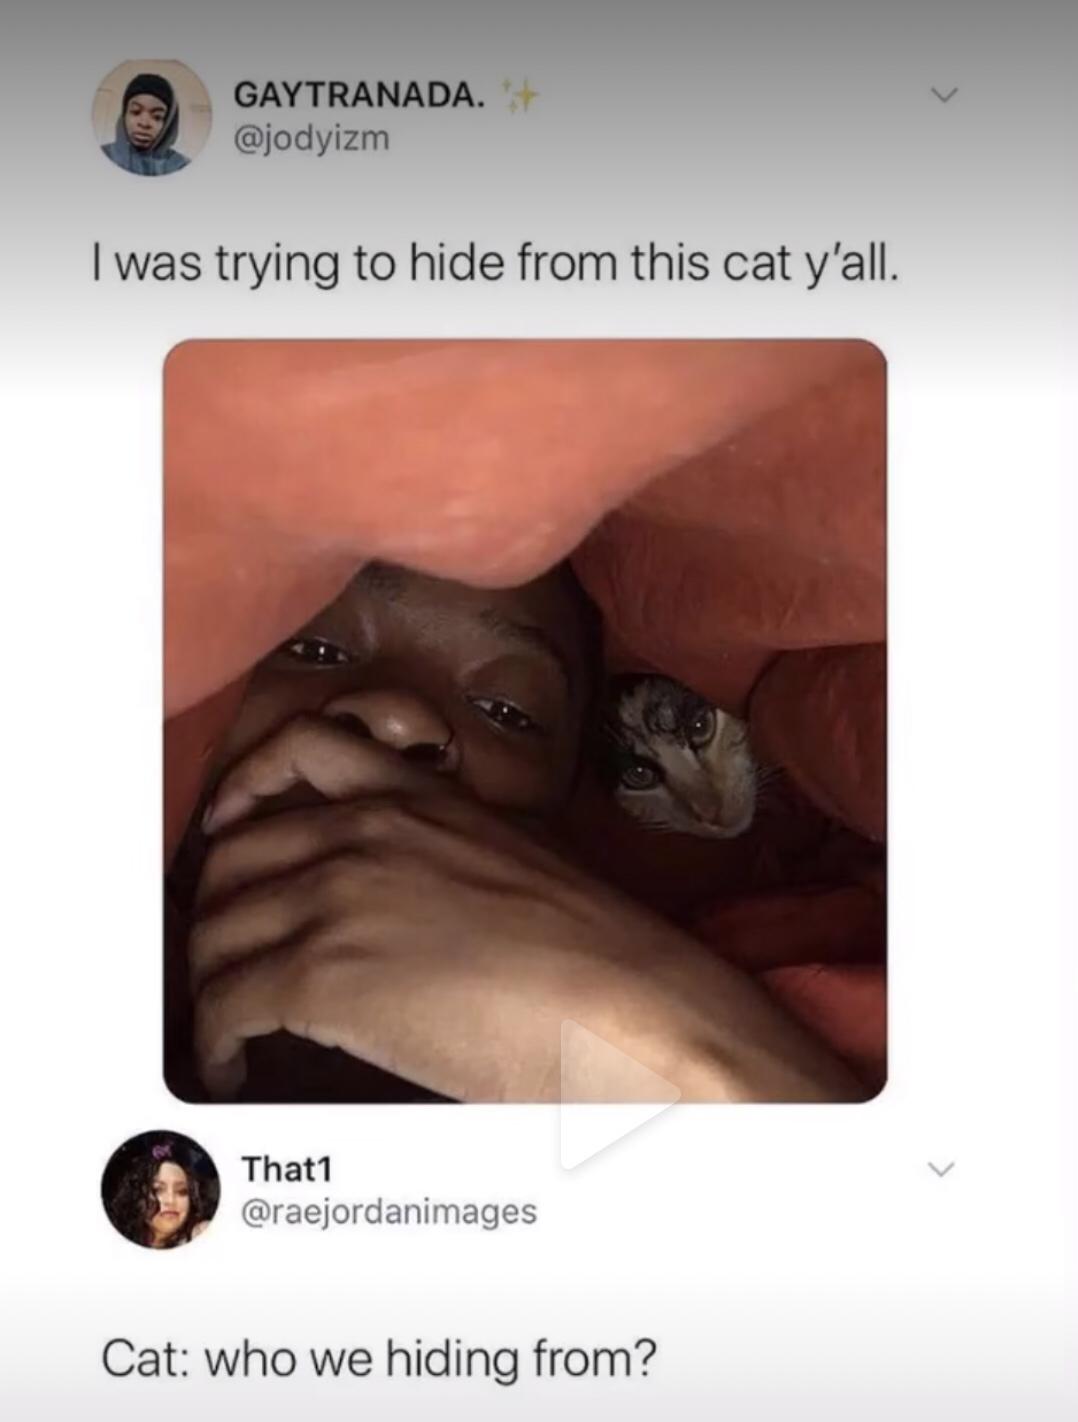 we hiding from cat - Gaytranada. I was trying to hide from this cat y'all. That1 Cat who we hiding from?